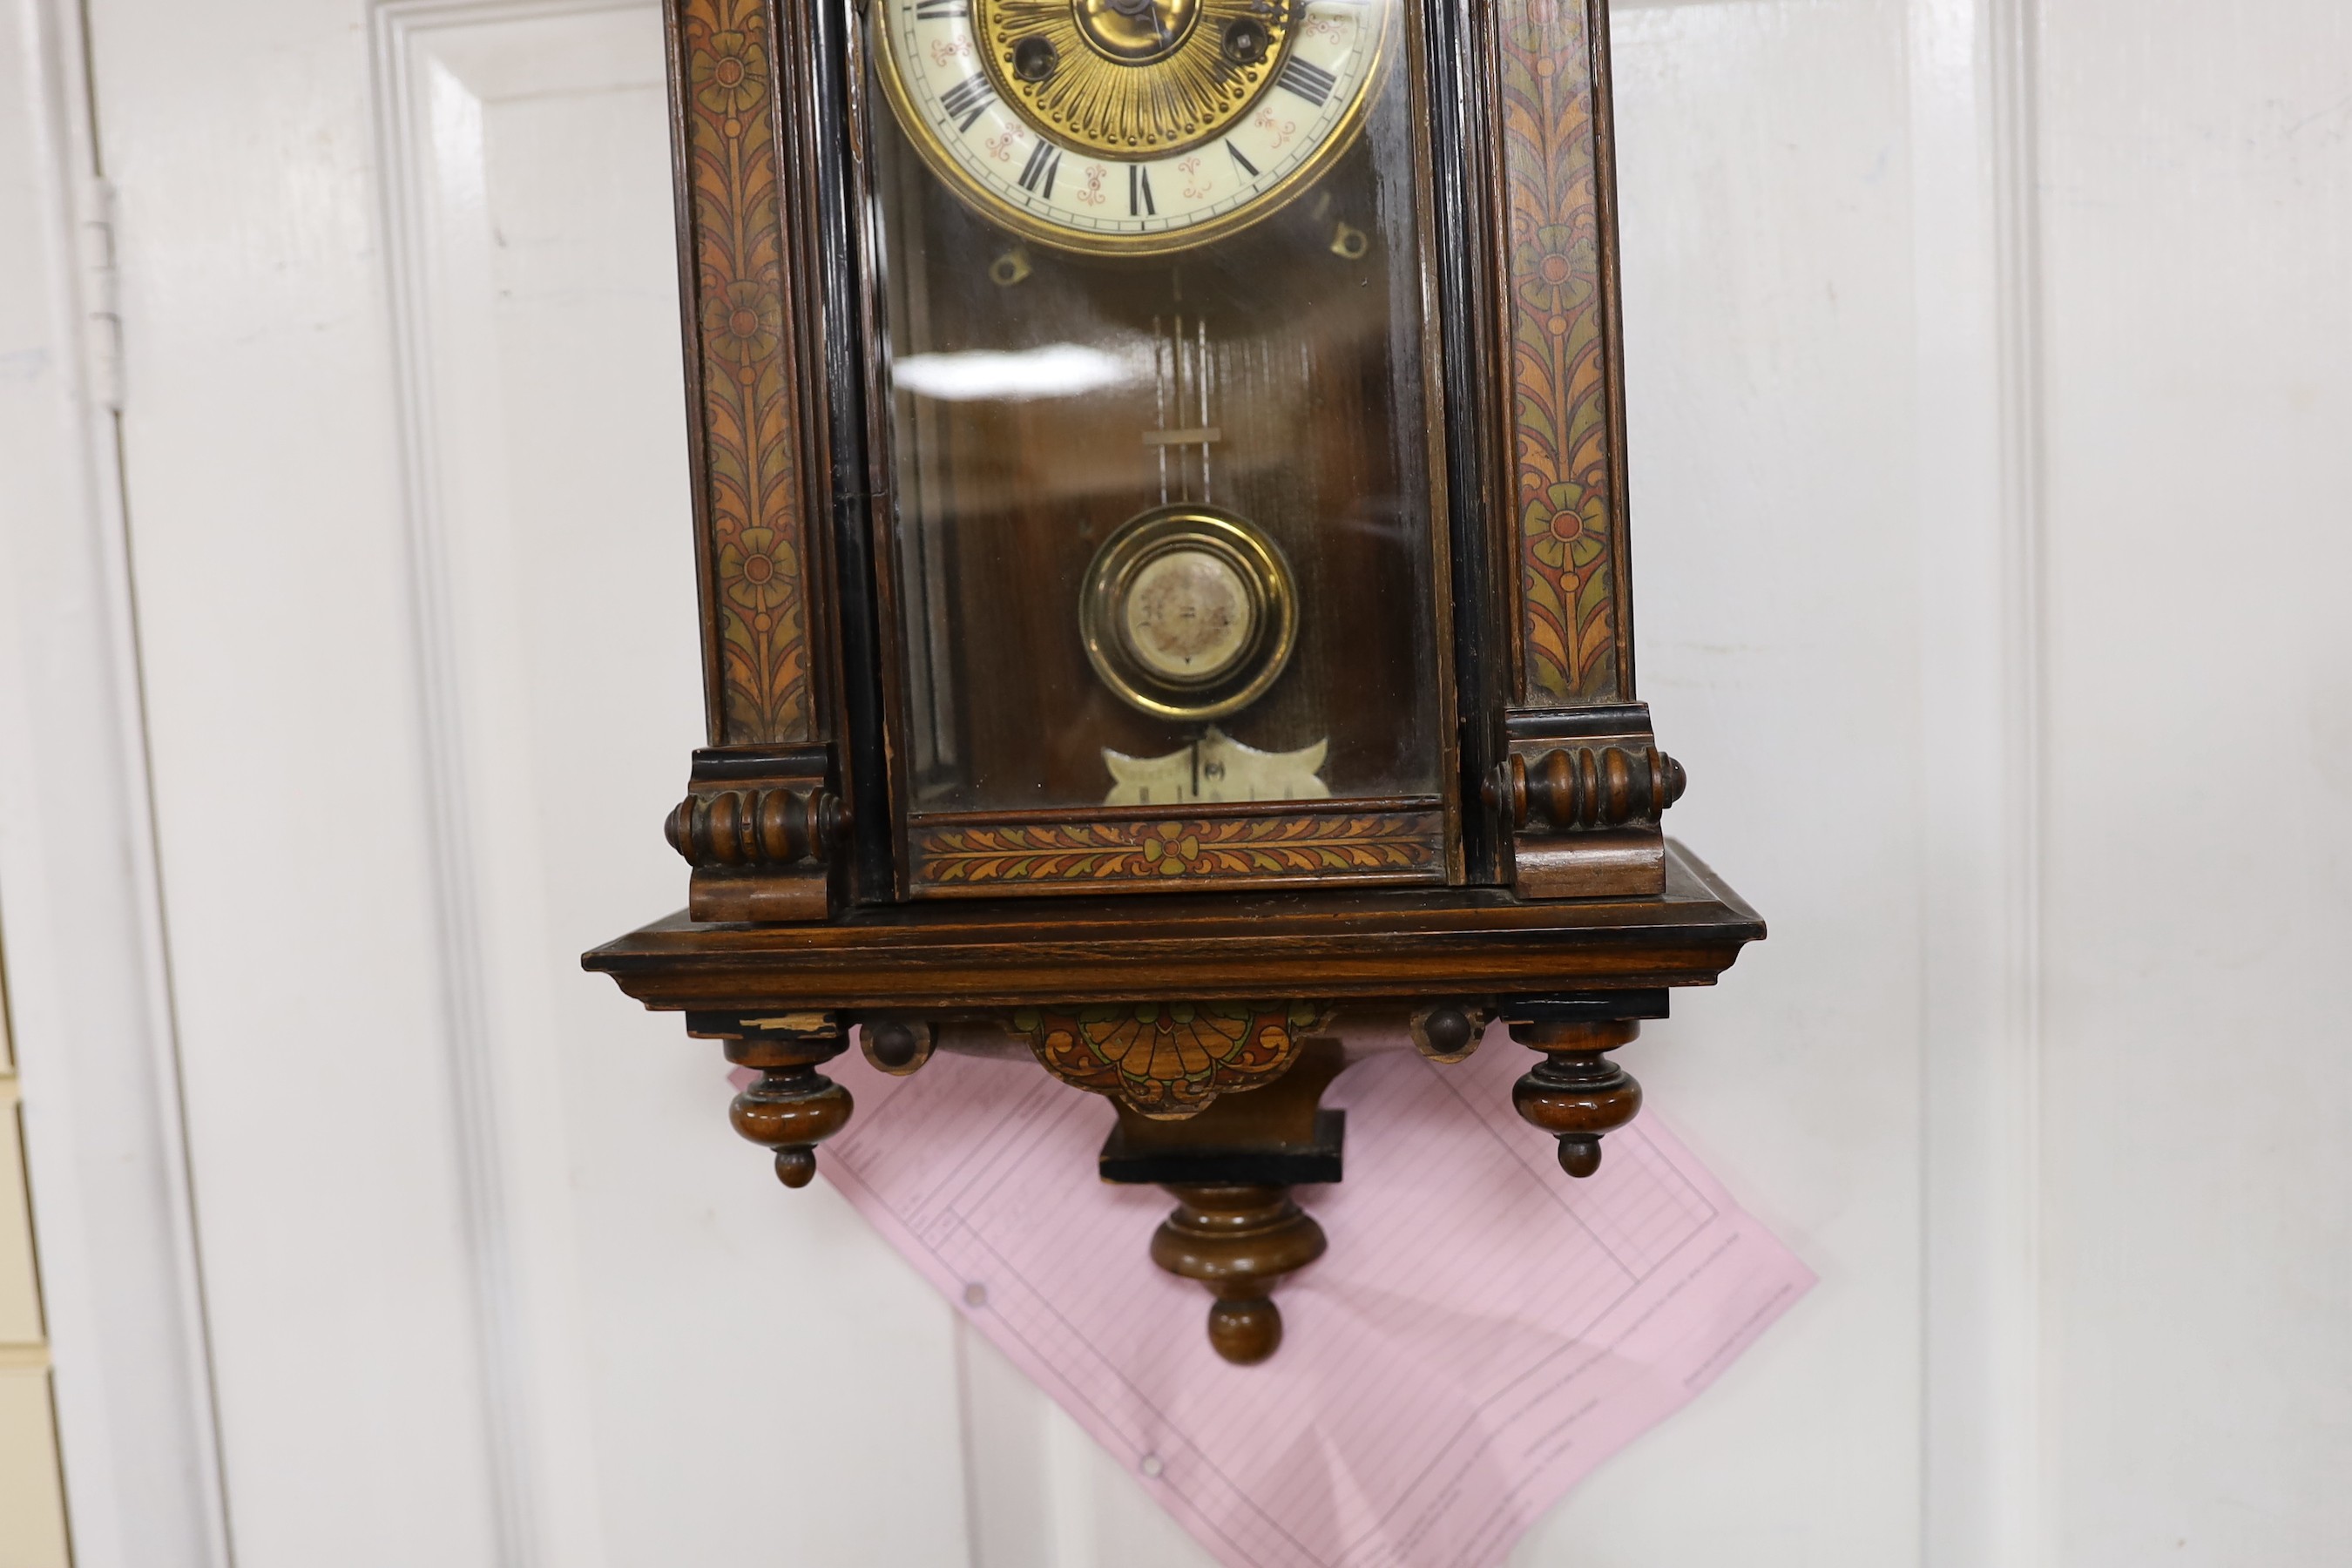 A small 19th century German wall clock with pendulum, 80cm long - Image 2 of 4